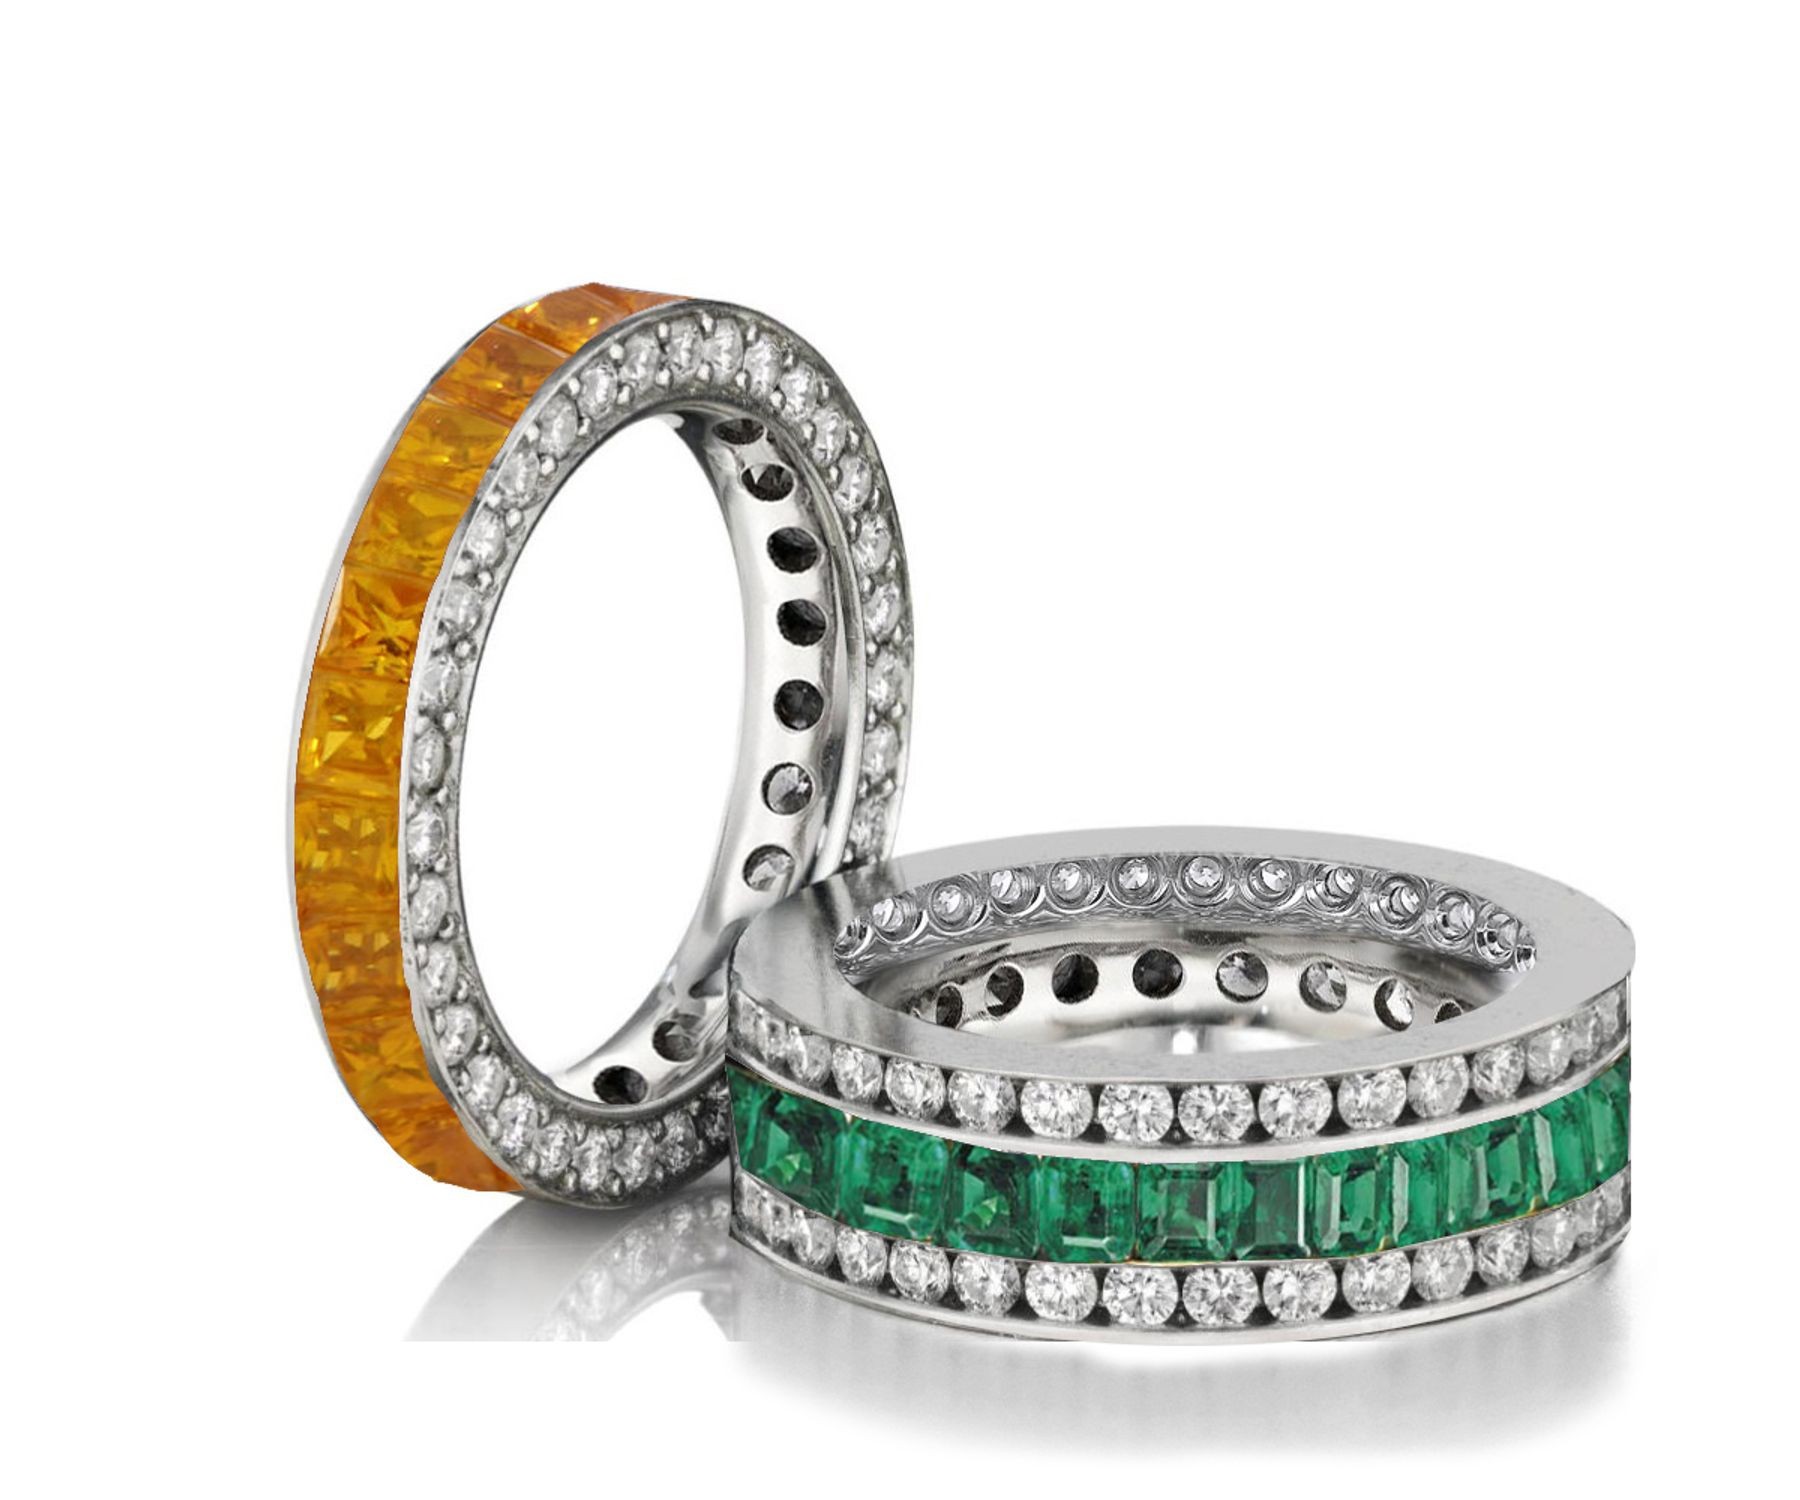 Made to Order Great Selection of Channel Set Princess Cut Round Diamonds Emerald & Yellow Sapphire Eternity Rings & Bands